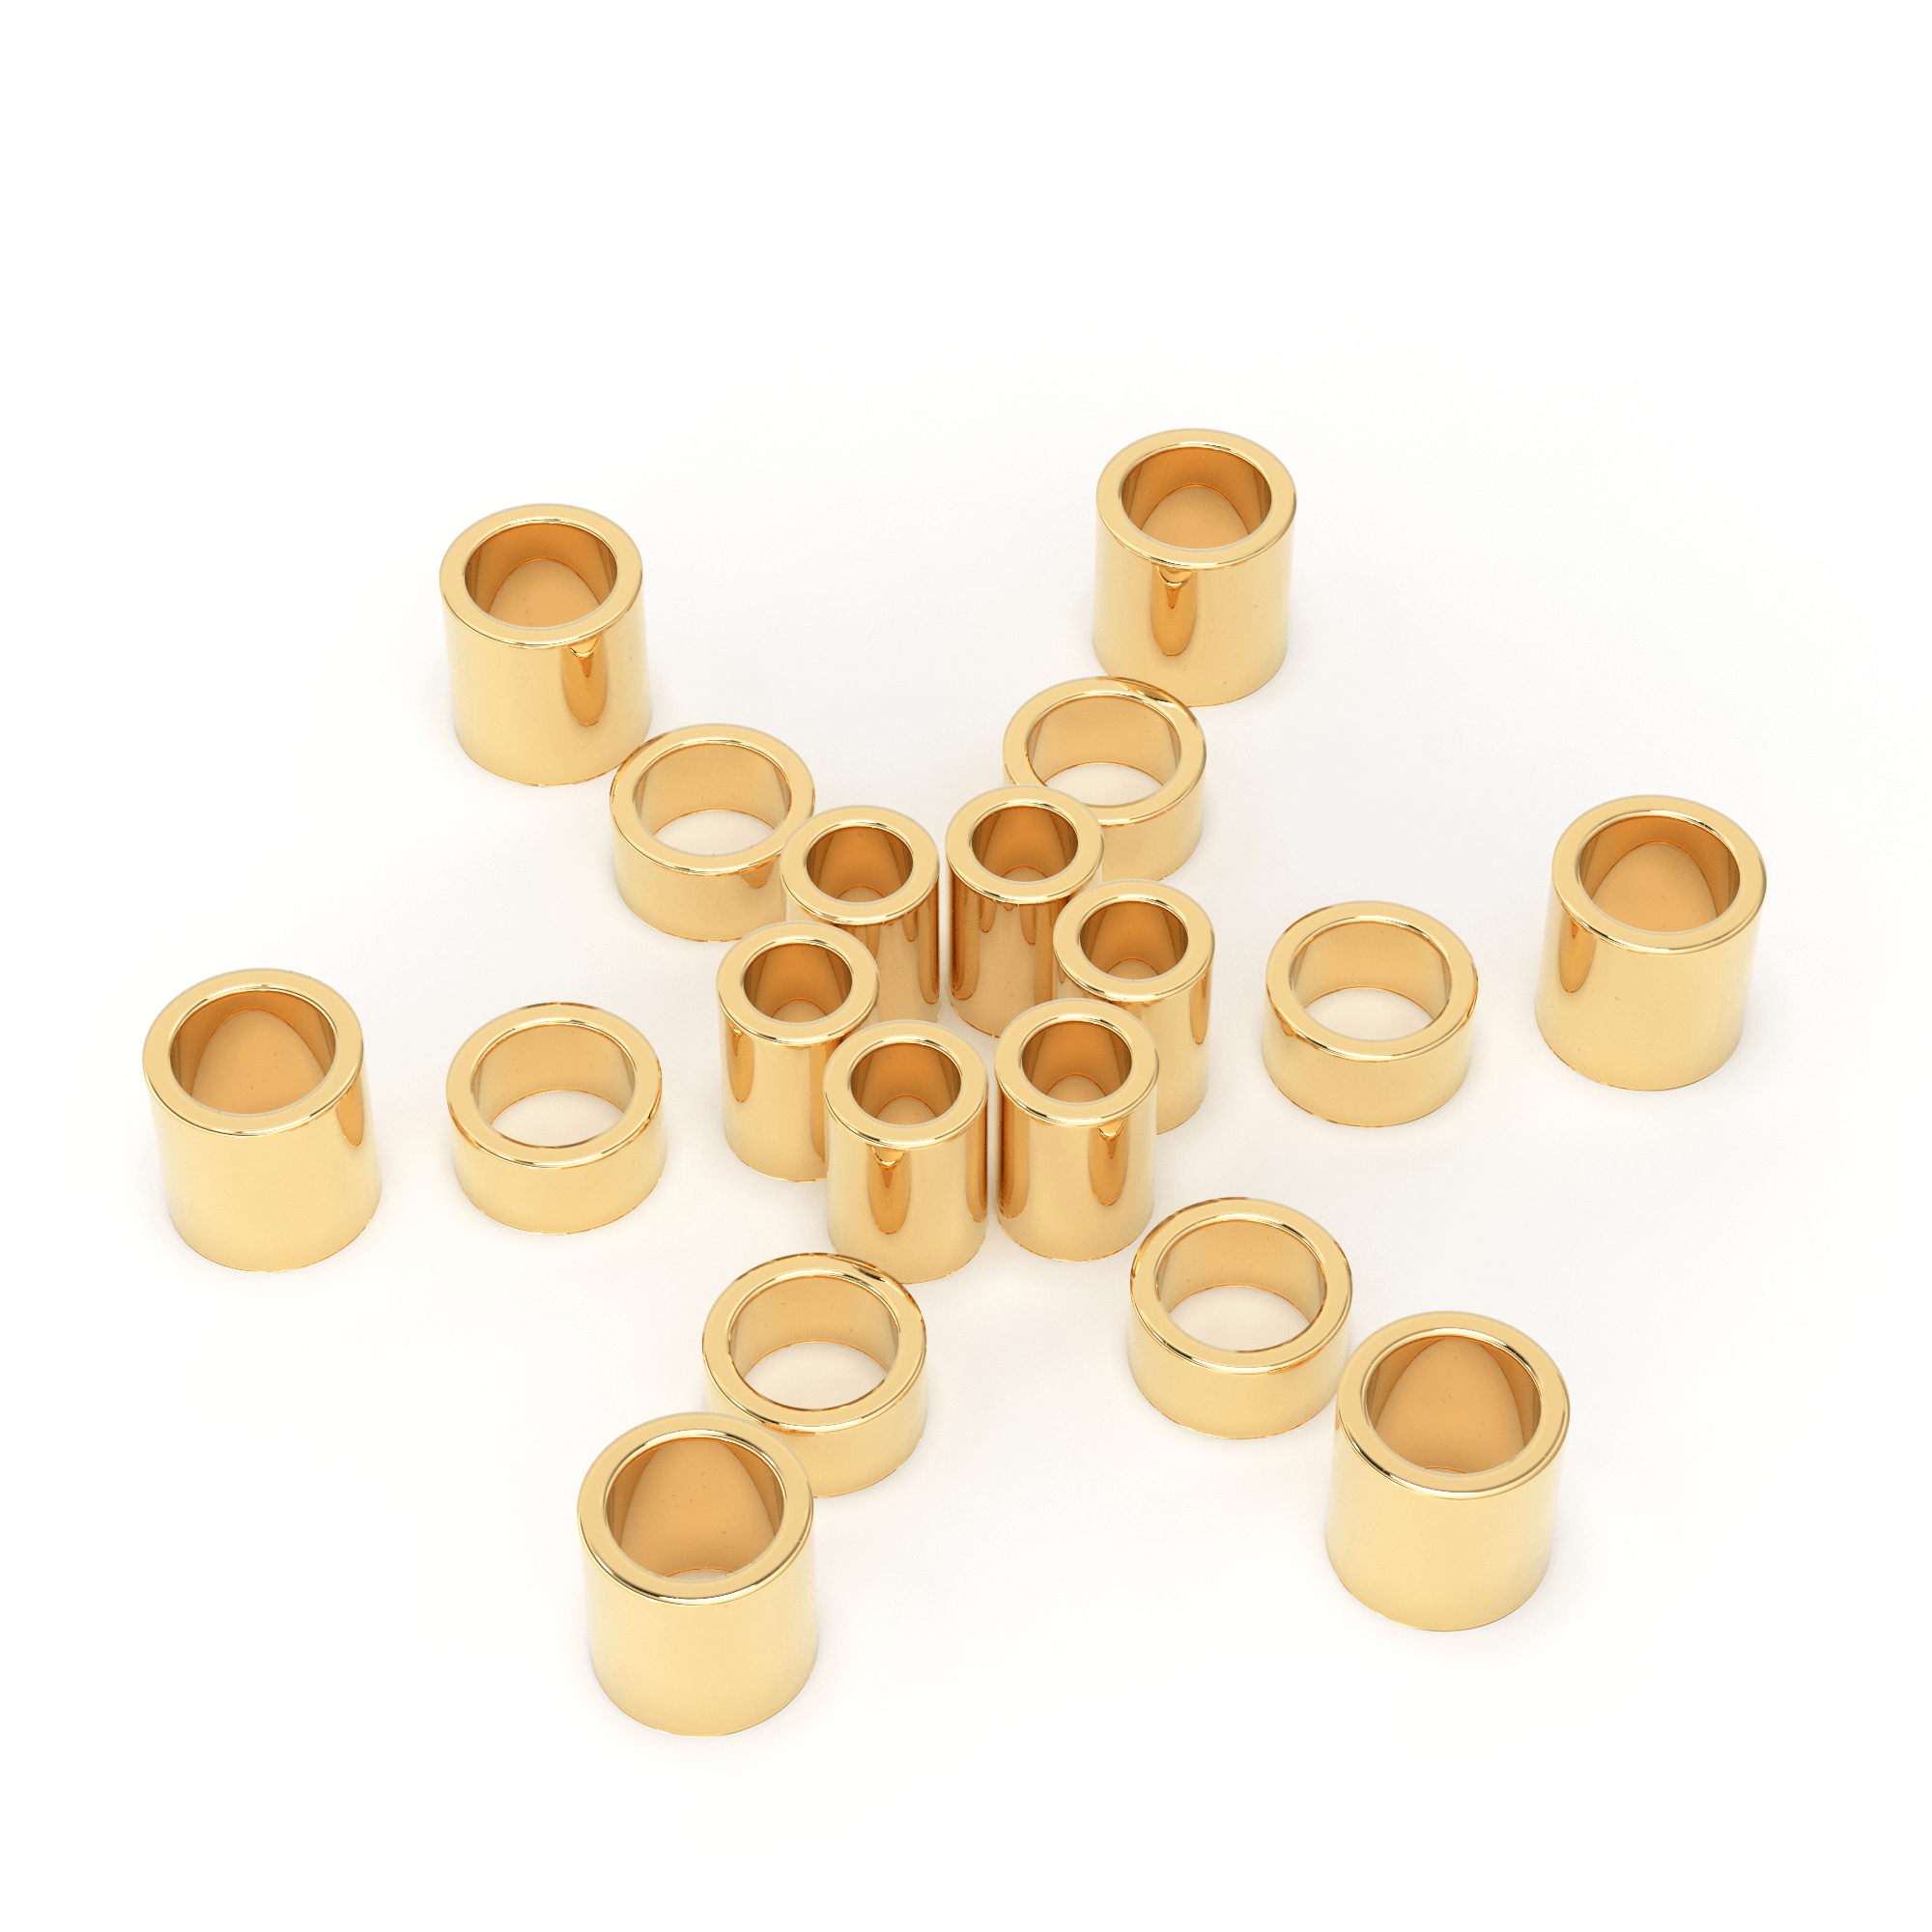 14k Solid Gold Tube Spacer Beads Stringing Jewelry Crimp Beads